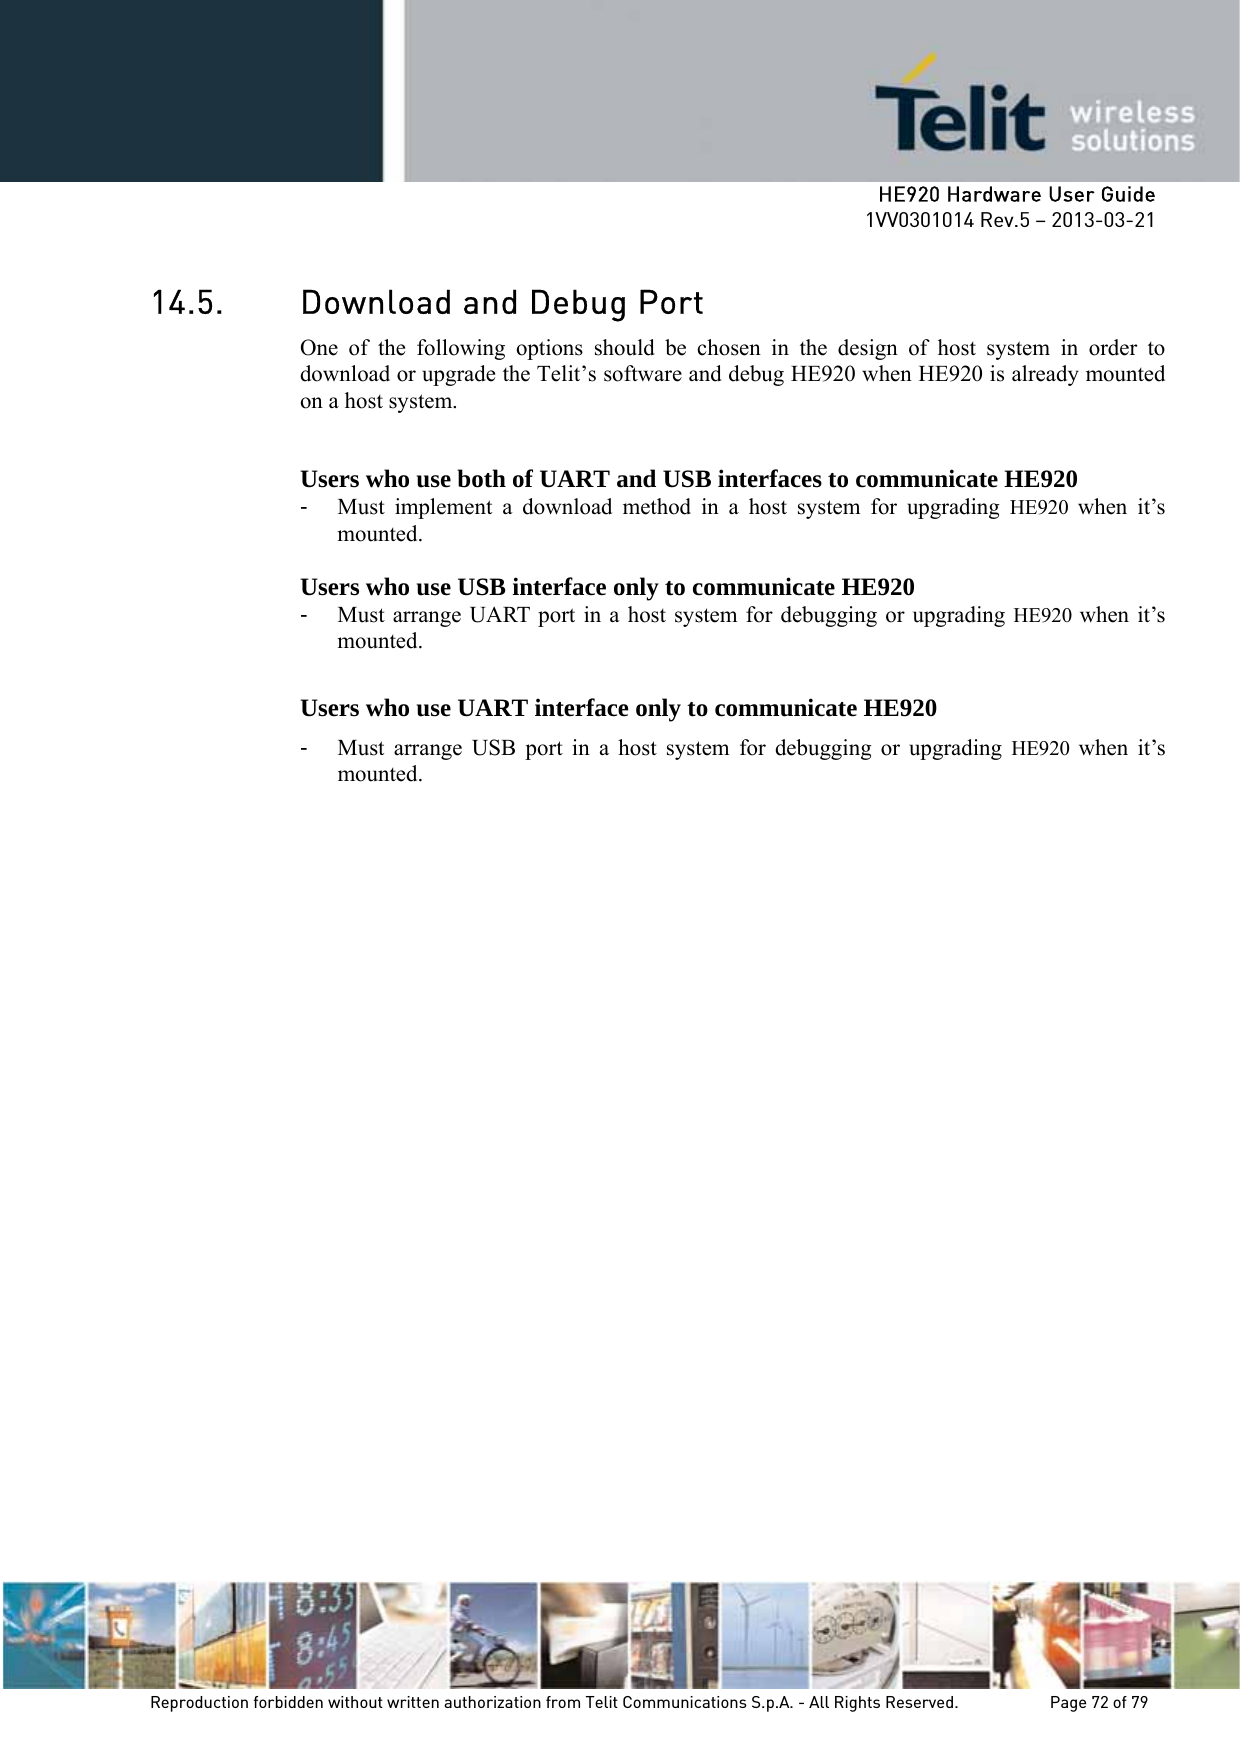     HE920 Hardware User Guide 1VV0301014 Rev.5 – 2013-03-21 Reproduction forbidden without written authorization from Telit Communications S.p.A. - All Rights Reserved.    Page 72 of 79  14.5. Download and Debug Port One of the following options should be chosen in the design of host system in order to download or upgrade the Telit’s software and debug HE920 when HE920 is already mounted on a host system.  Users who use both of UART and USB interfaces to communicate HE920 -  Must implement a download method in a host system for upgrading HE920  when it’s mounted.  Users who use USB interface only to communicate HE920 -  Must arrange UART port in a host system for debugging or upgrading HE920 when it’s mounted.  Users who use UART interface only to communicate HE920 -  Must arrange USB port in a host system for debugging or upgrading HE920  when it’s mounted.   